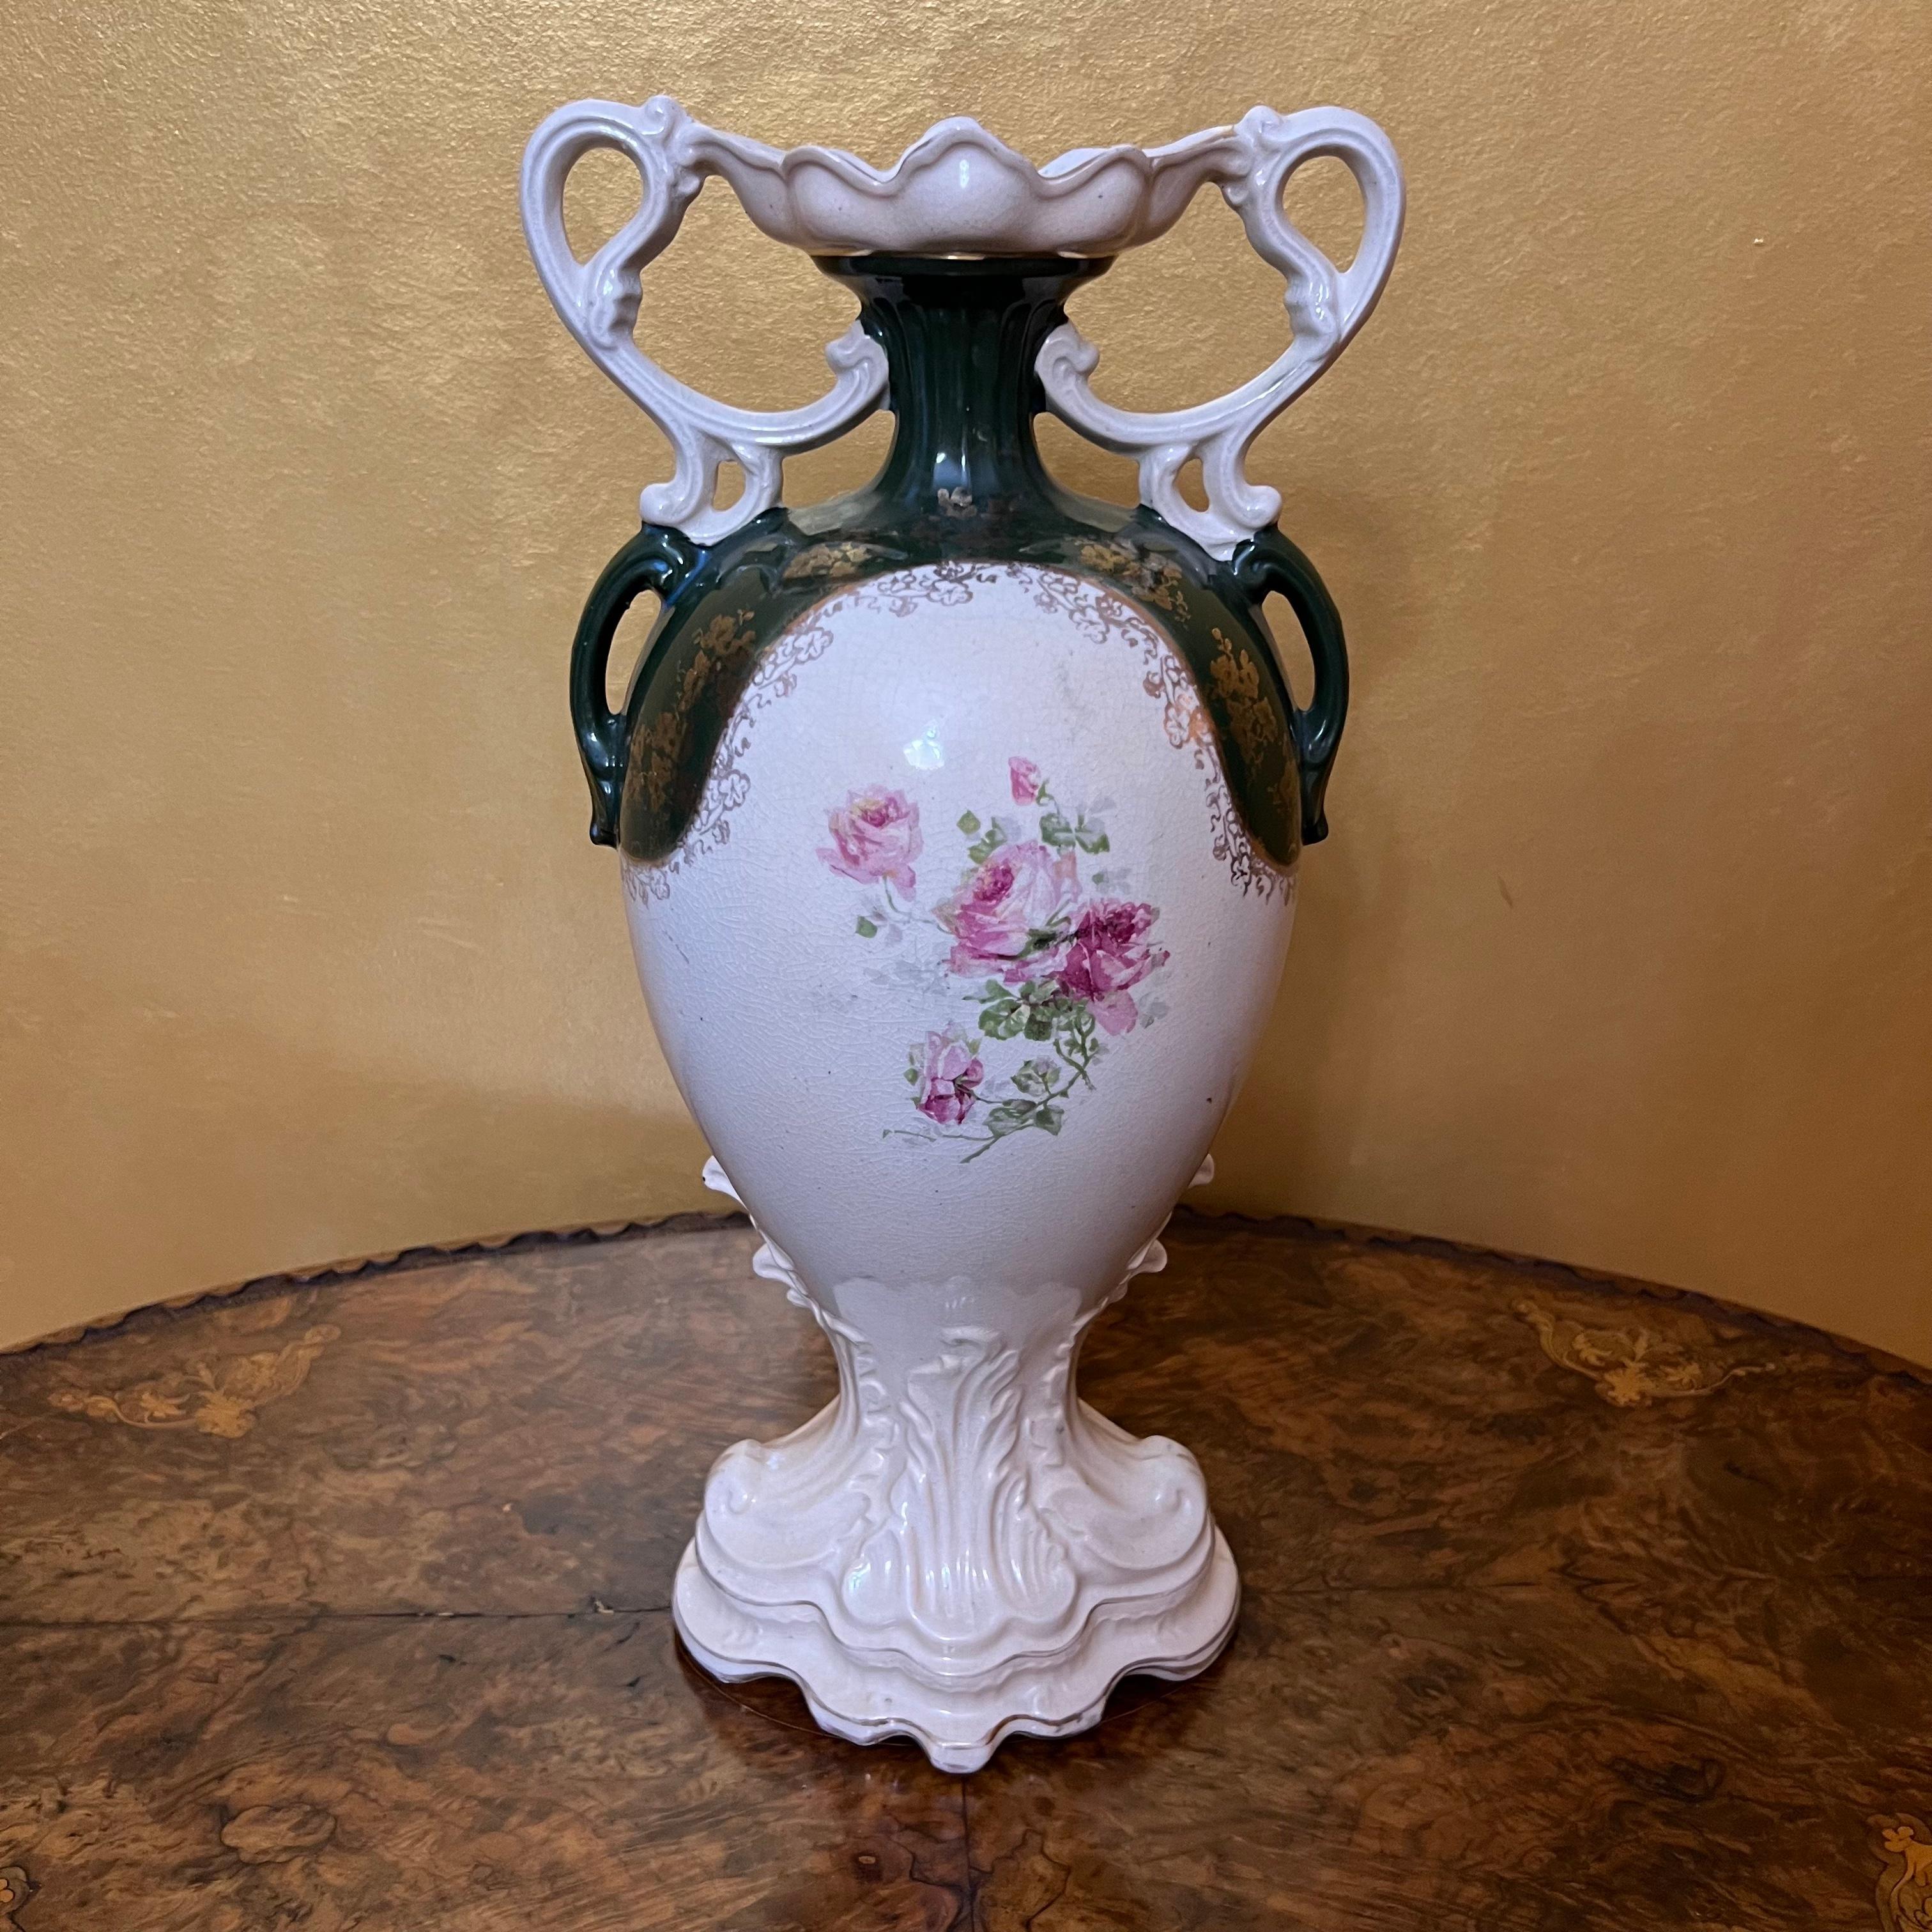 Floral painted vase with gold detailing, ware and fade to gold due to age, crazing and small chip to front rim. Beautiful display pieces. 

Circa: Early 20th Century 

Material: Porcelain

Country Of Origin: England 

Measurements:43cm high, 20cm